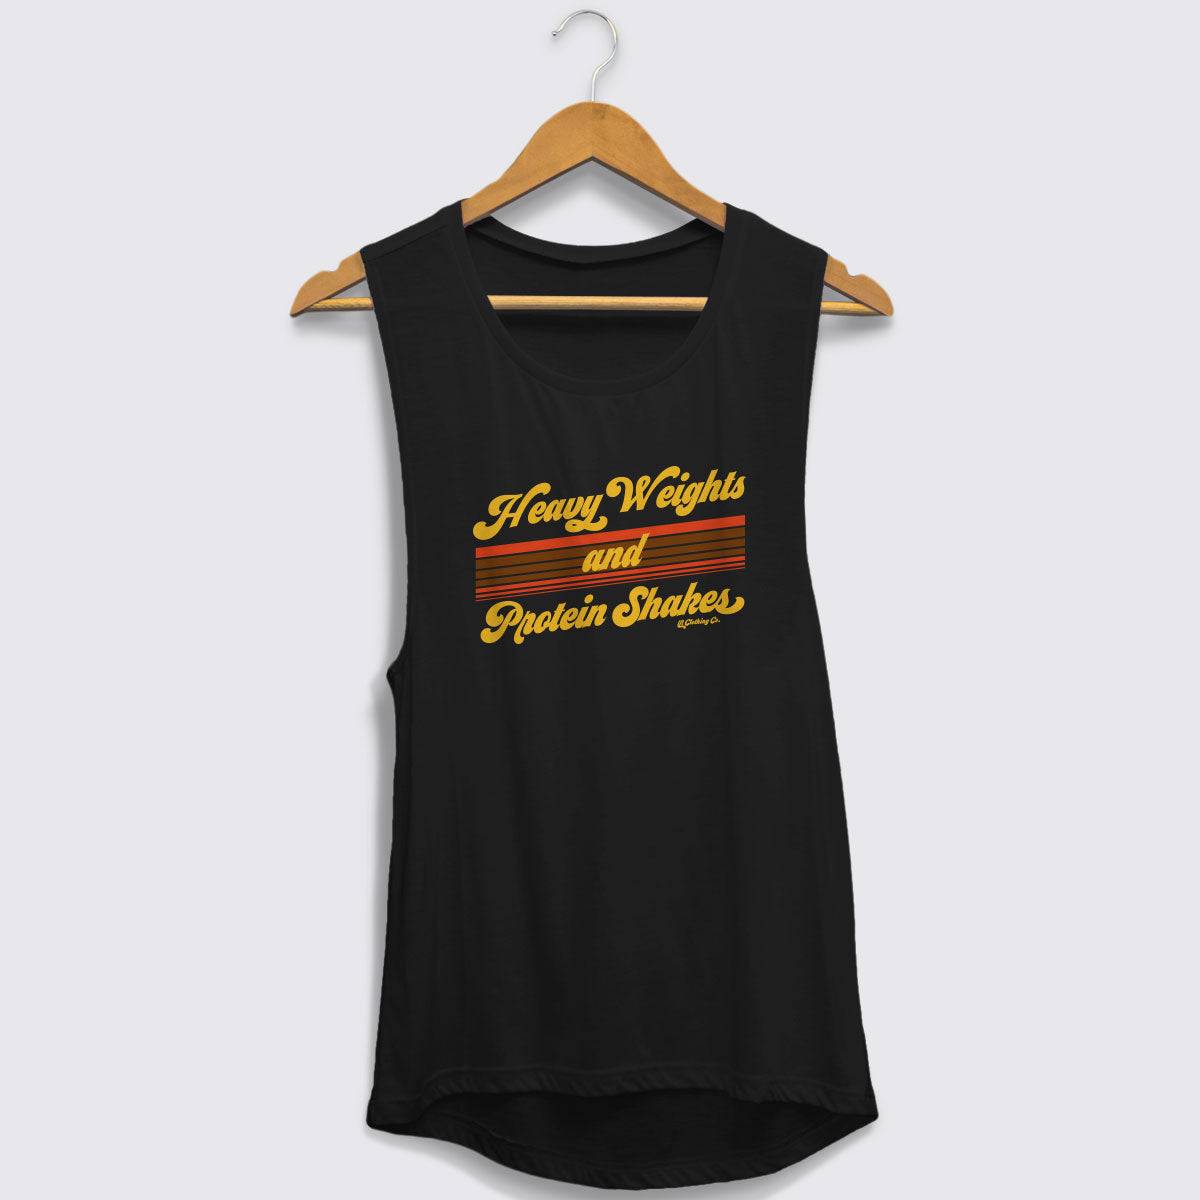 Heavy Weights &amp; Protein Shakes Women’s Festival Muscle Tank